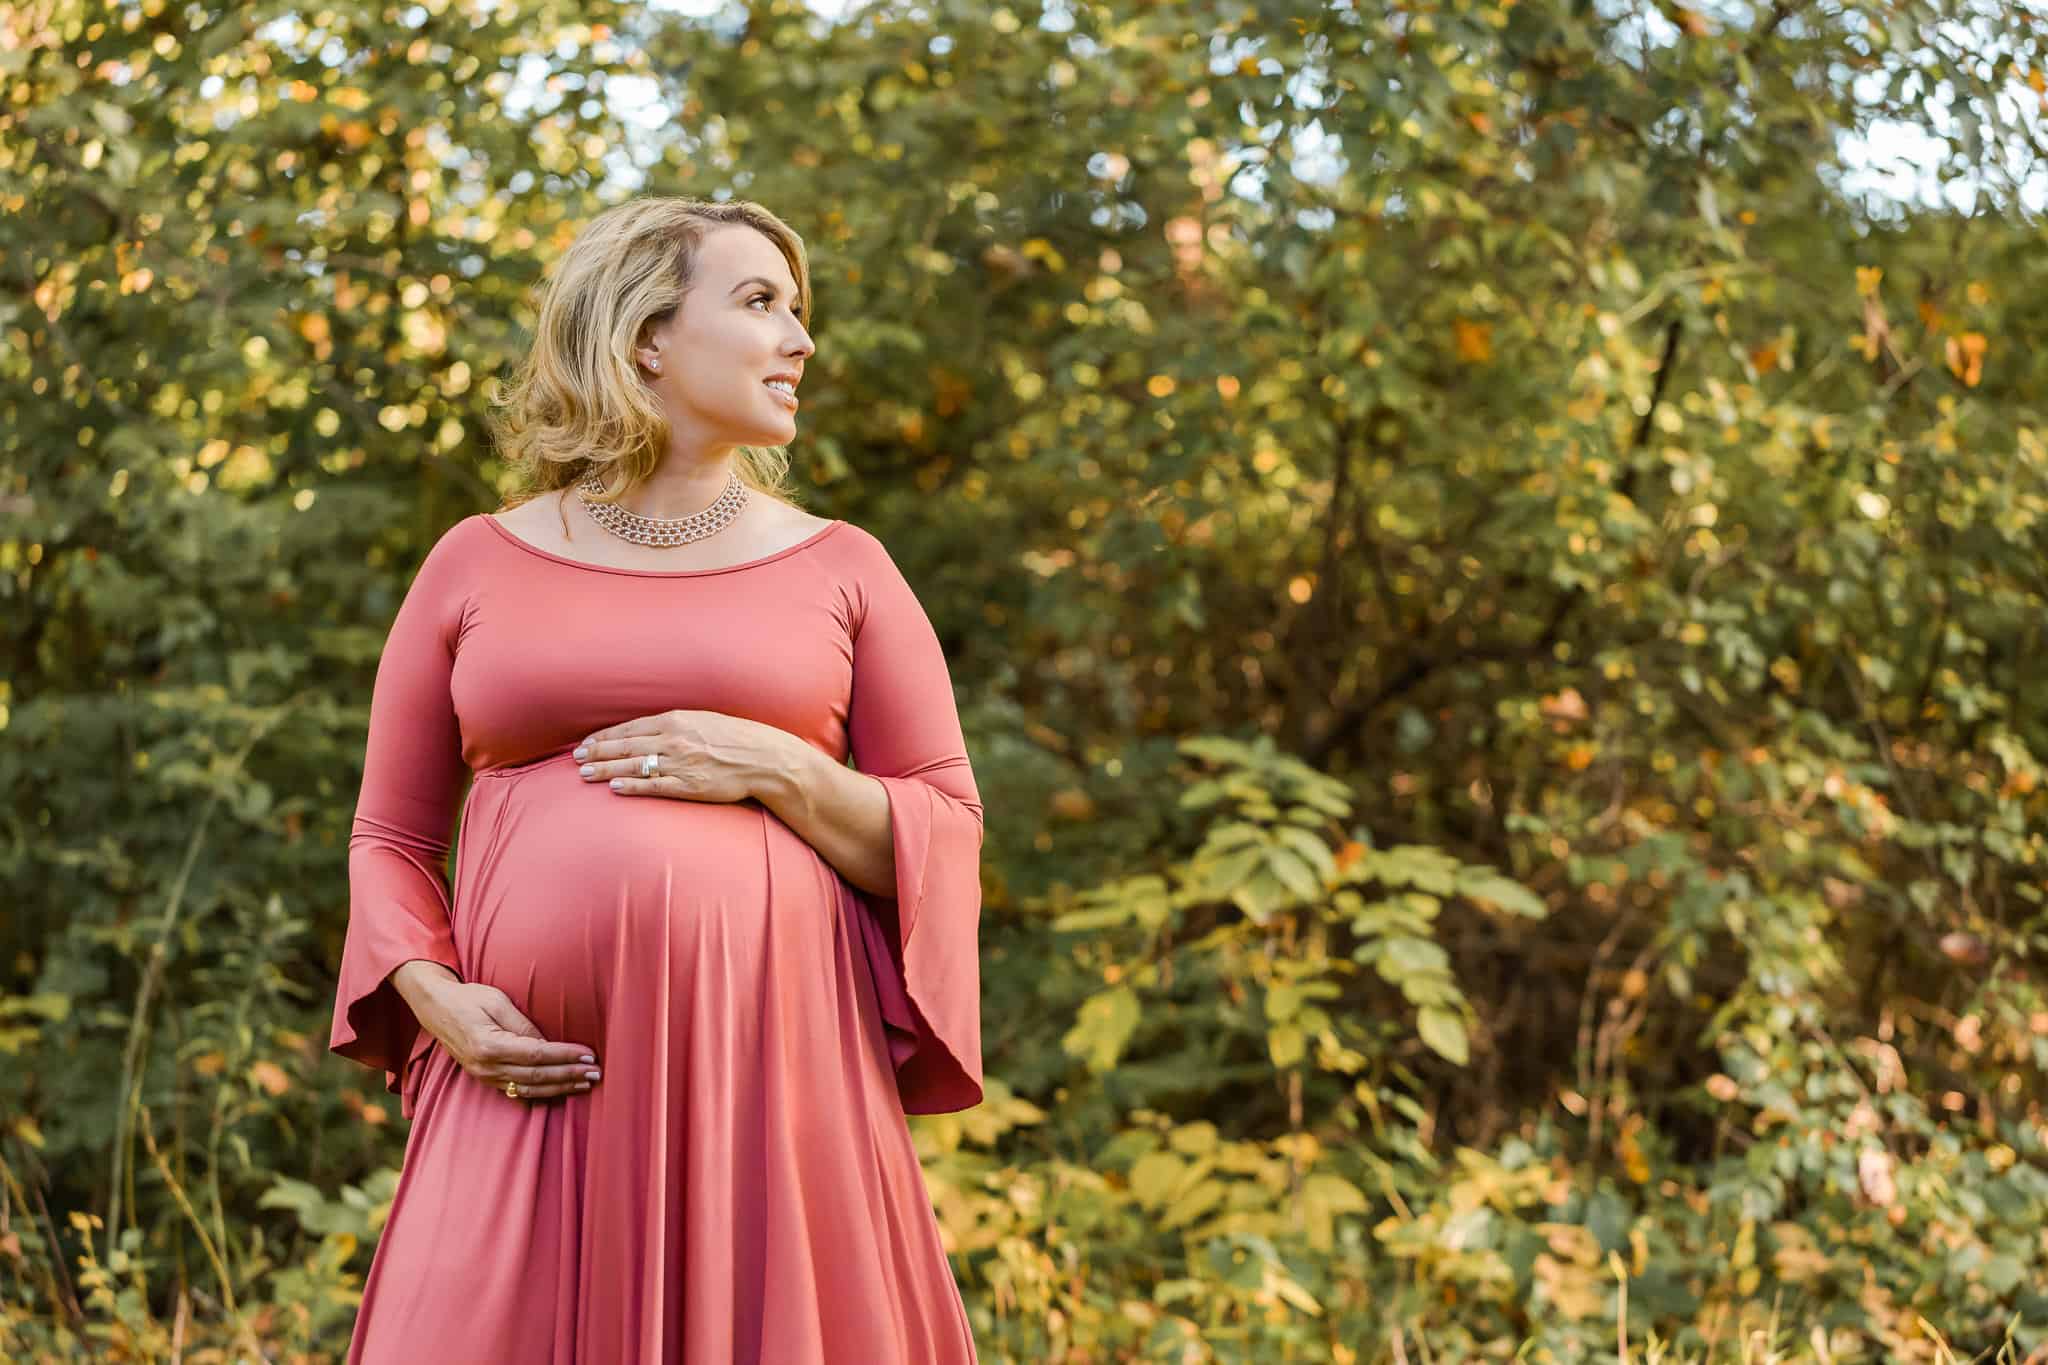 A beautiful mother-to-be in a rose colored dress posing in front of some fall foliage, featured on a blog about placenta encapsulation Northern Virginia.